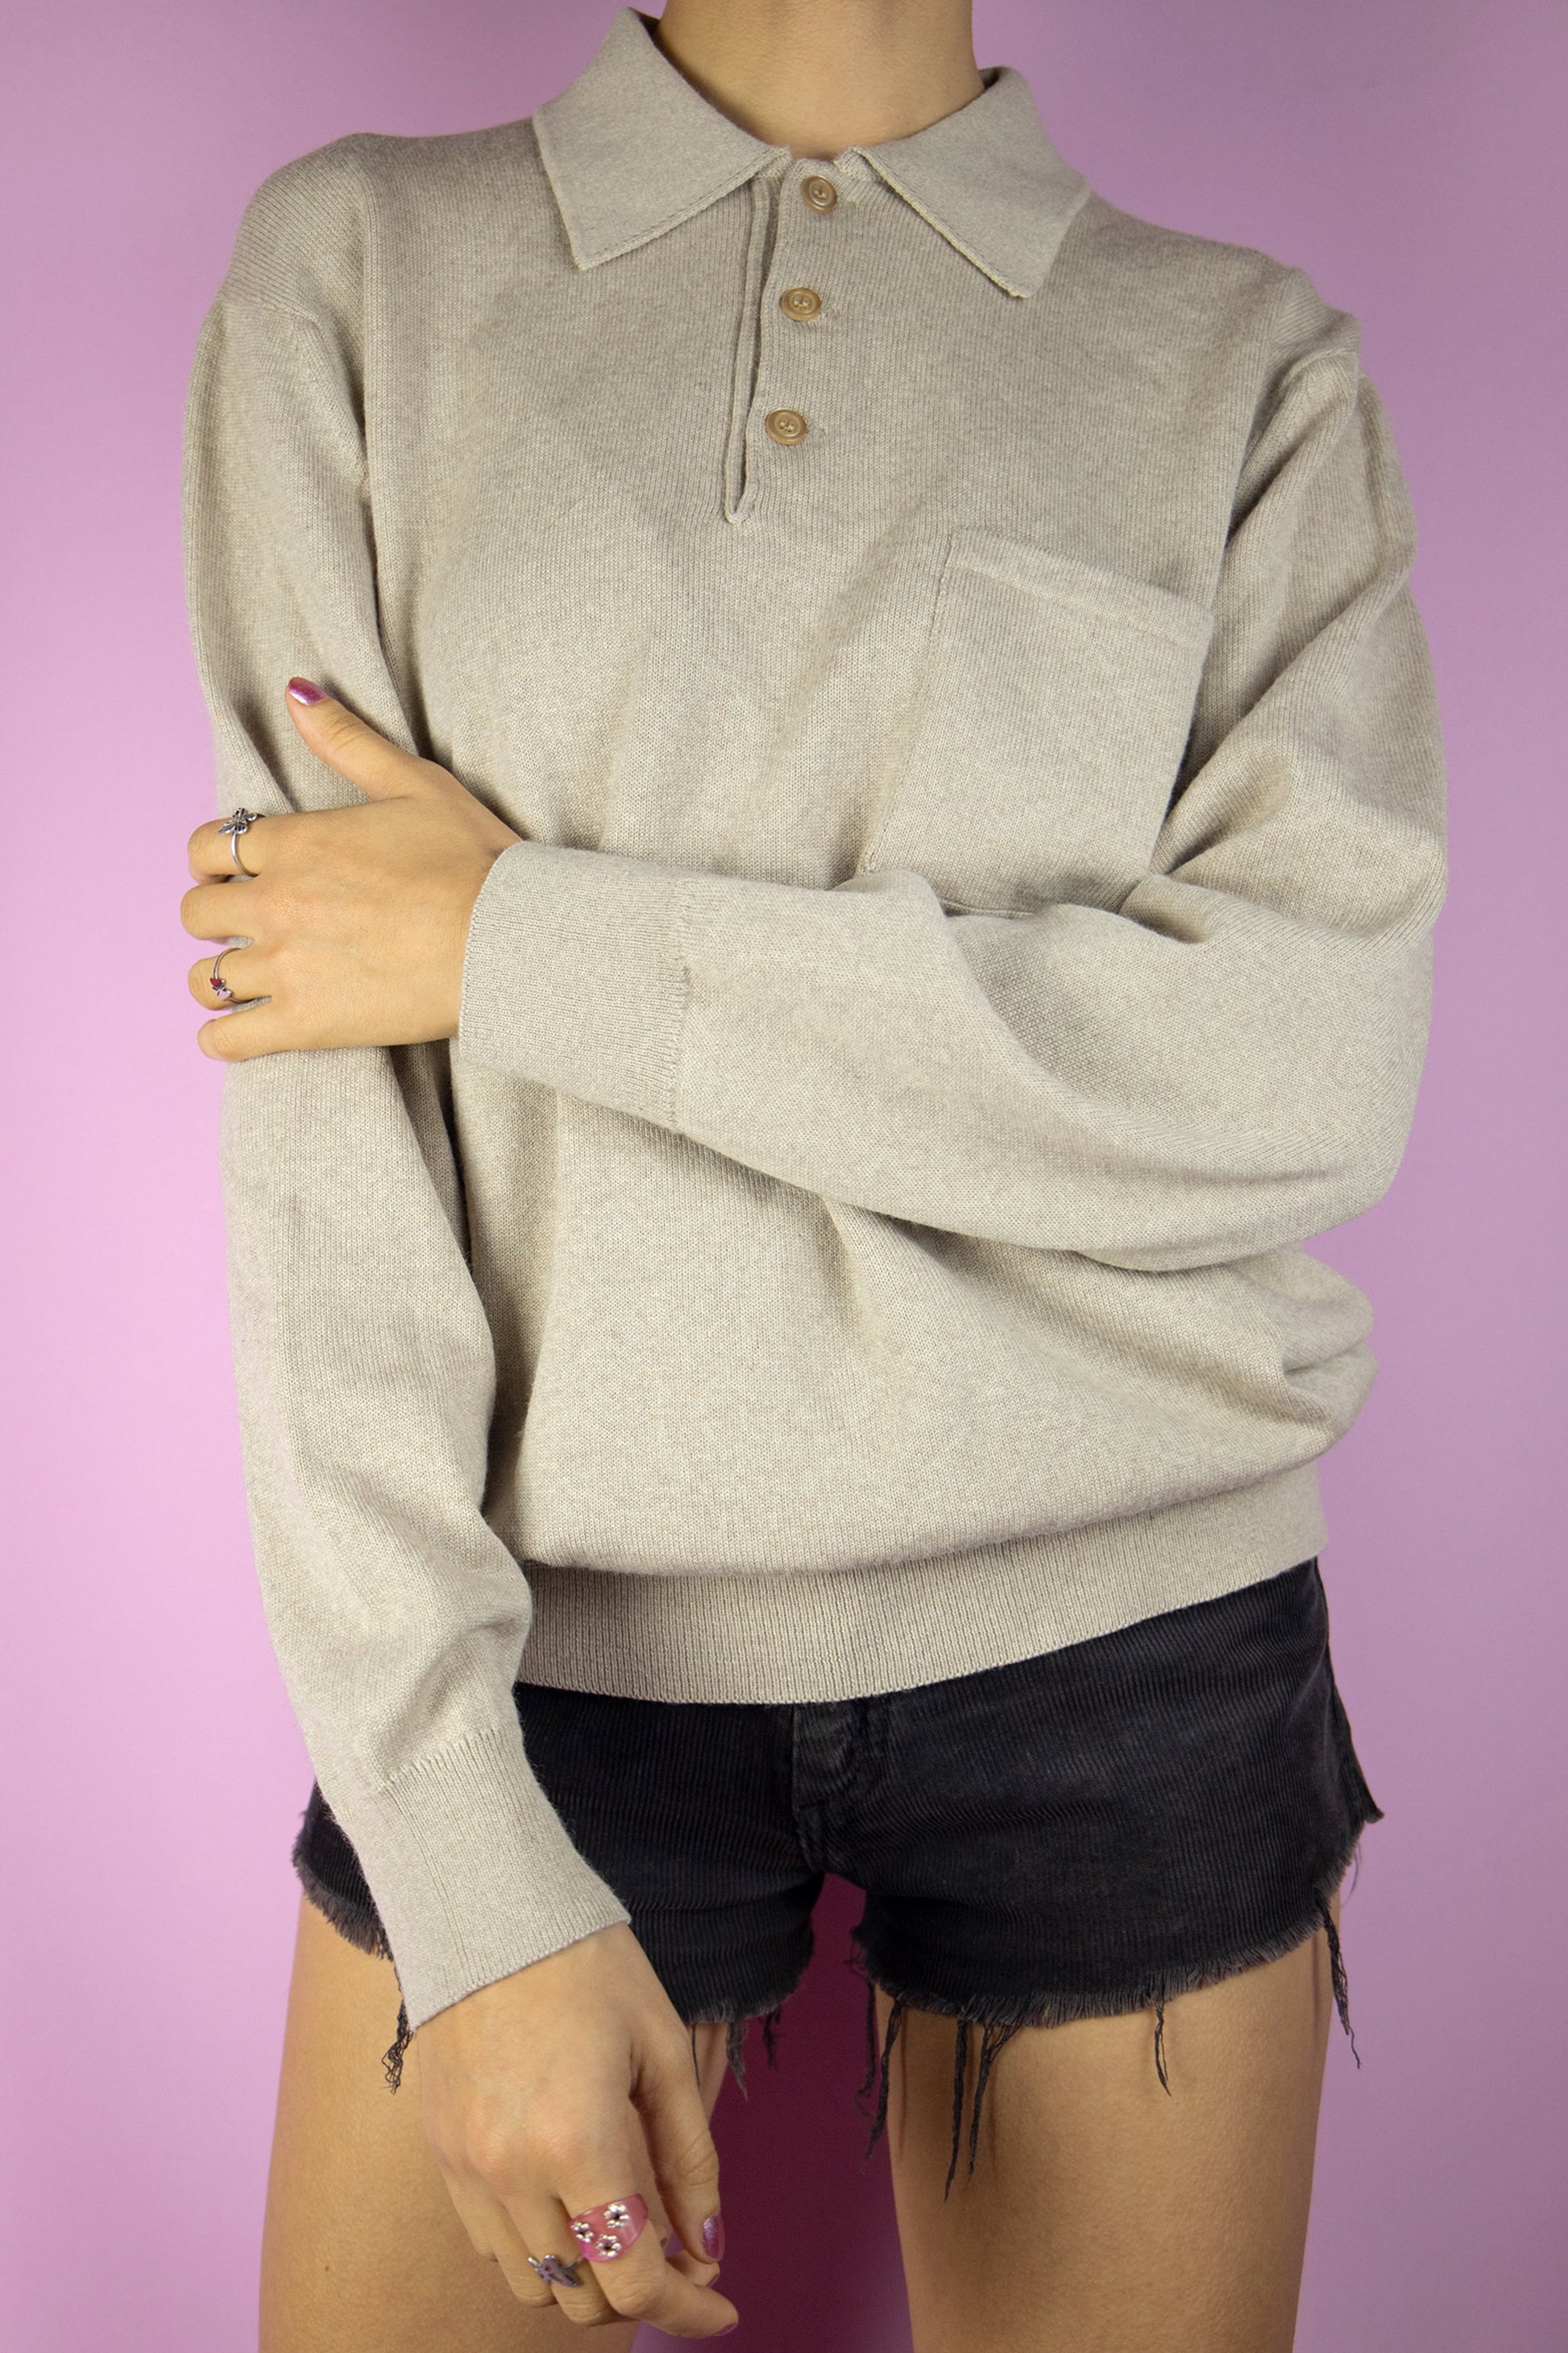 The Vintage 90s Light Brown Collared Sweater is a light brown beige half-button wool blend sweater with a collar and a pocket. Classic retro 1990s preppy knit jumper.